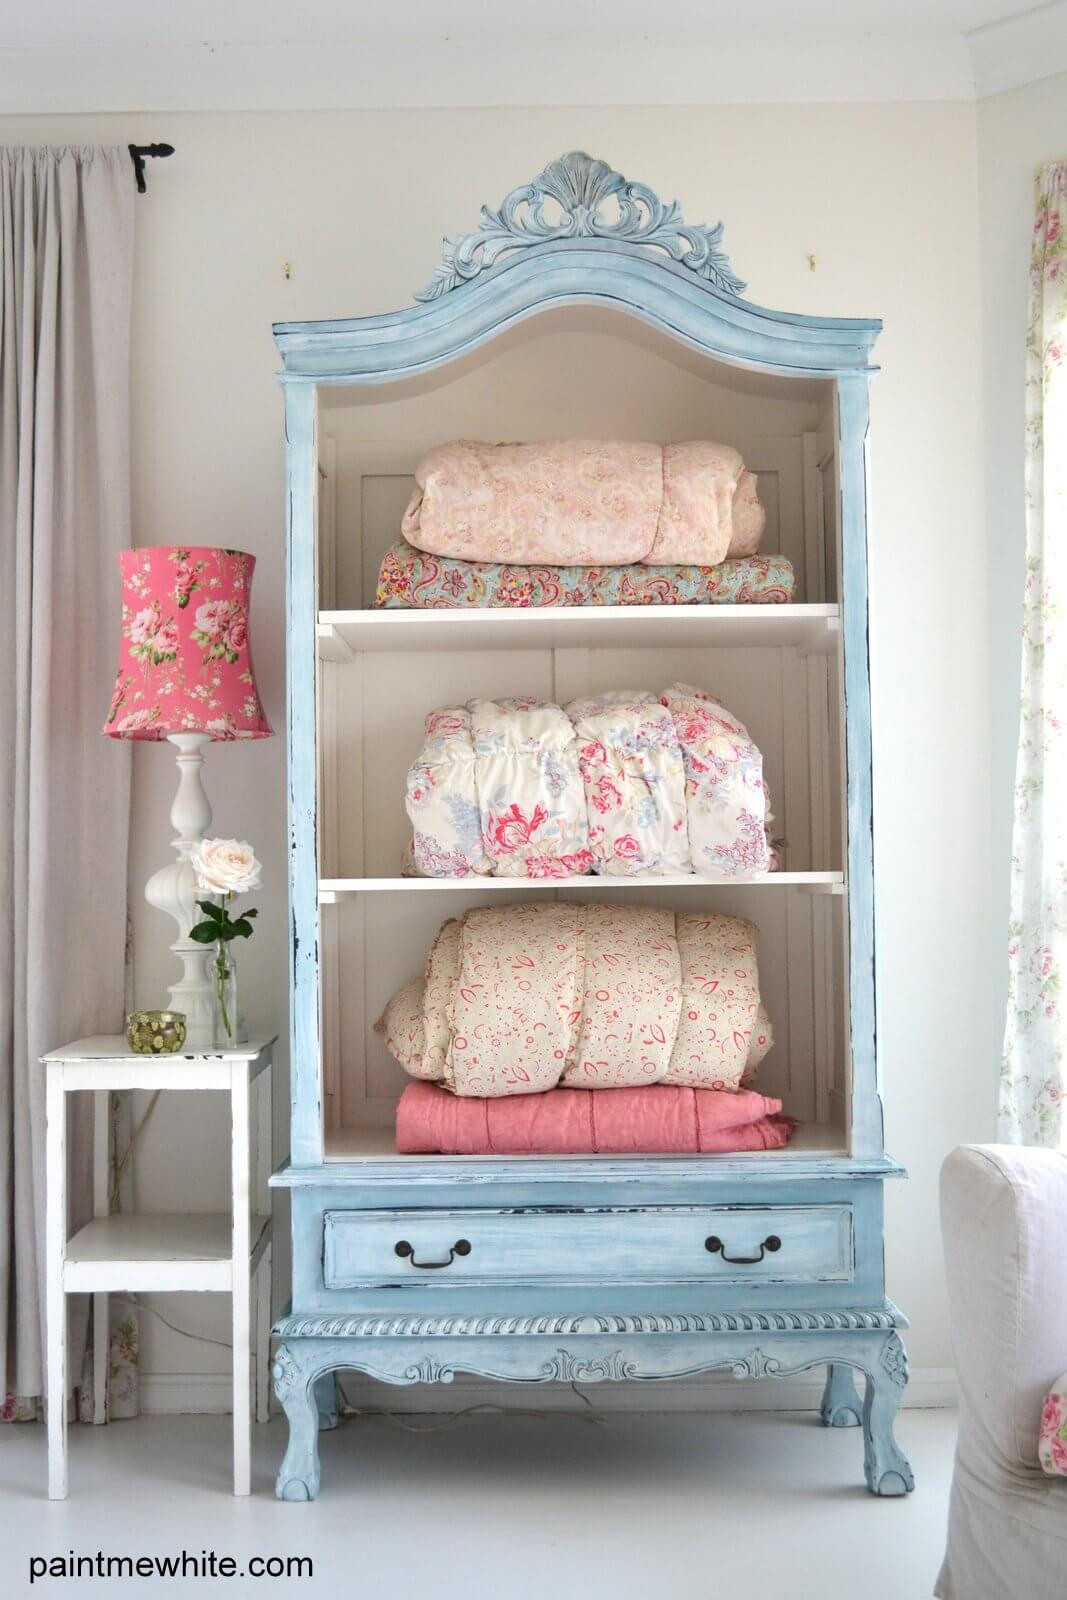 Shabby Chic Bedroom Set
 35 Best Shabby Chic Bedroom Design and Decor Ideas for 2017